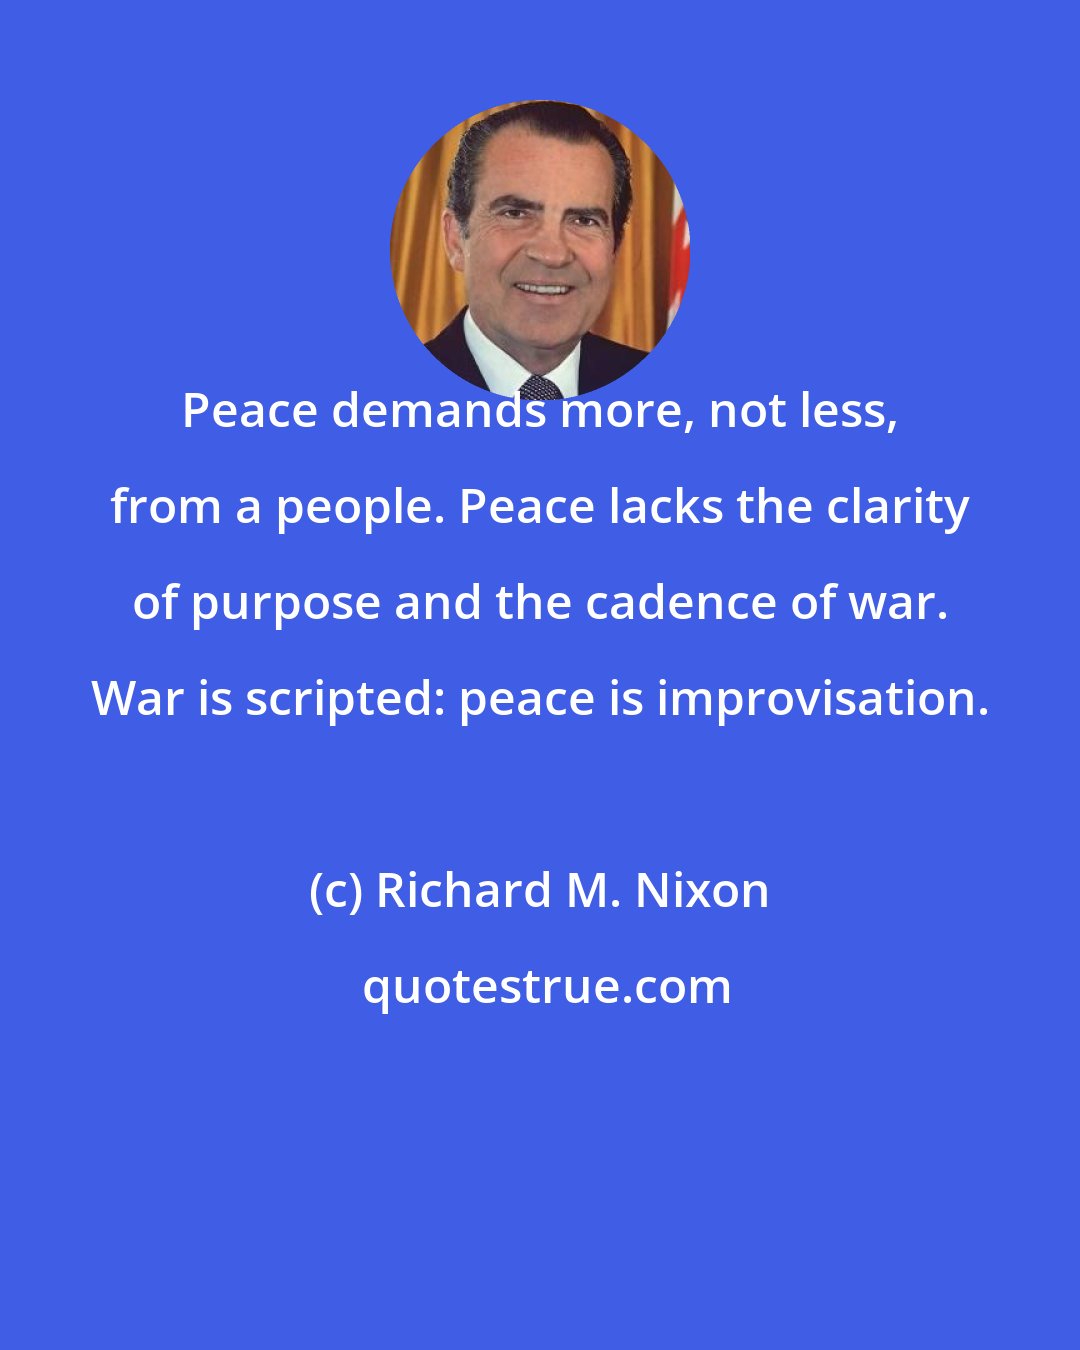 Richard M. Nixon: Peace demands more, not less, from a people. Peace lacks the clarity of purpose and the cadence of war. War is scripted: peace is improvisation.